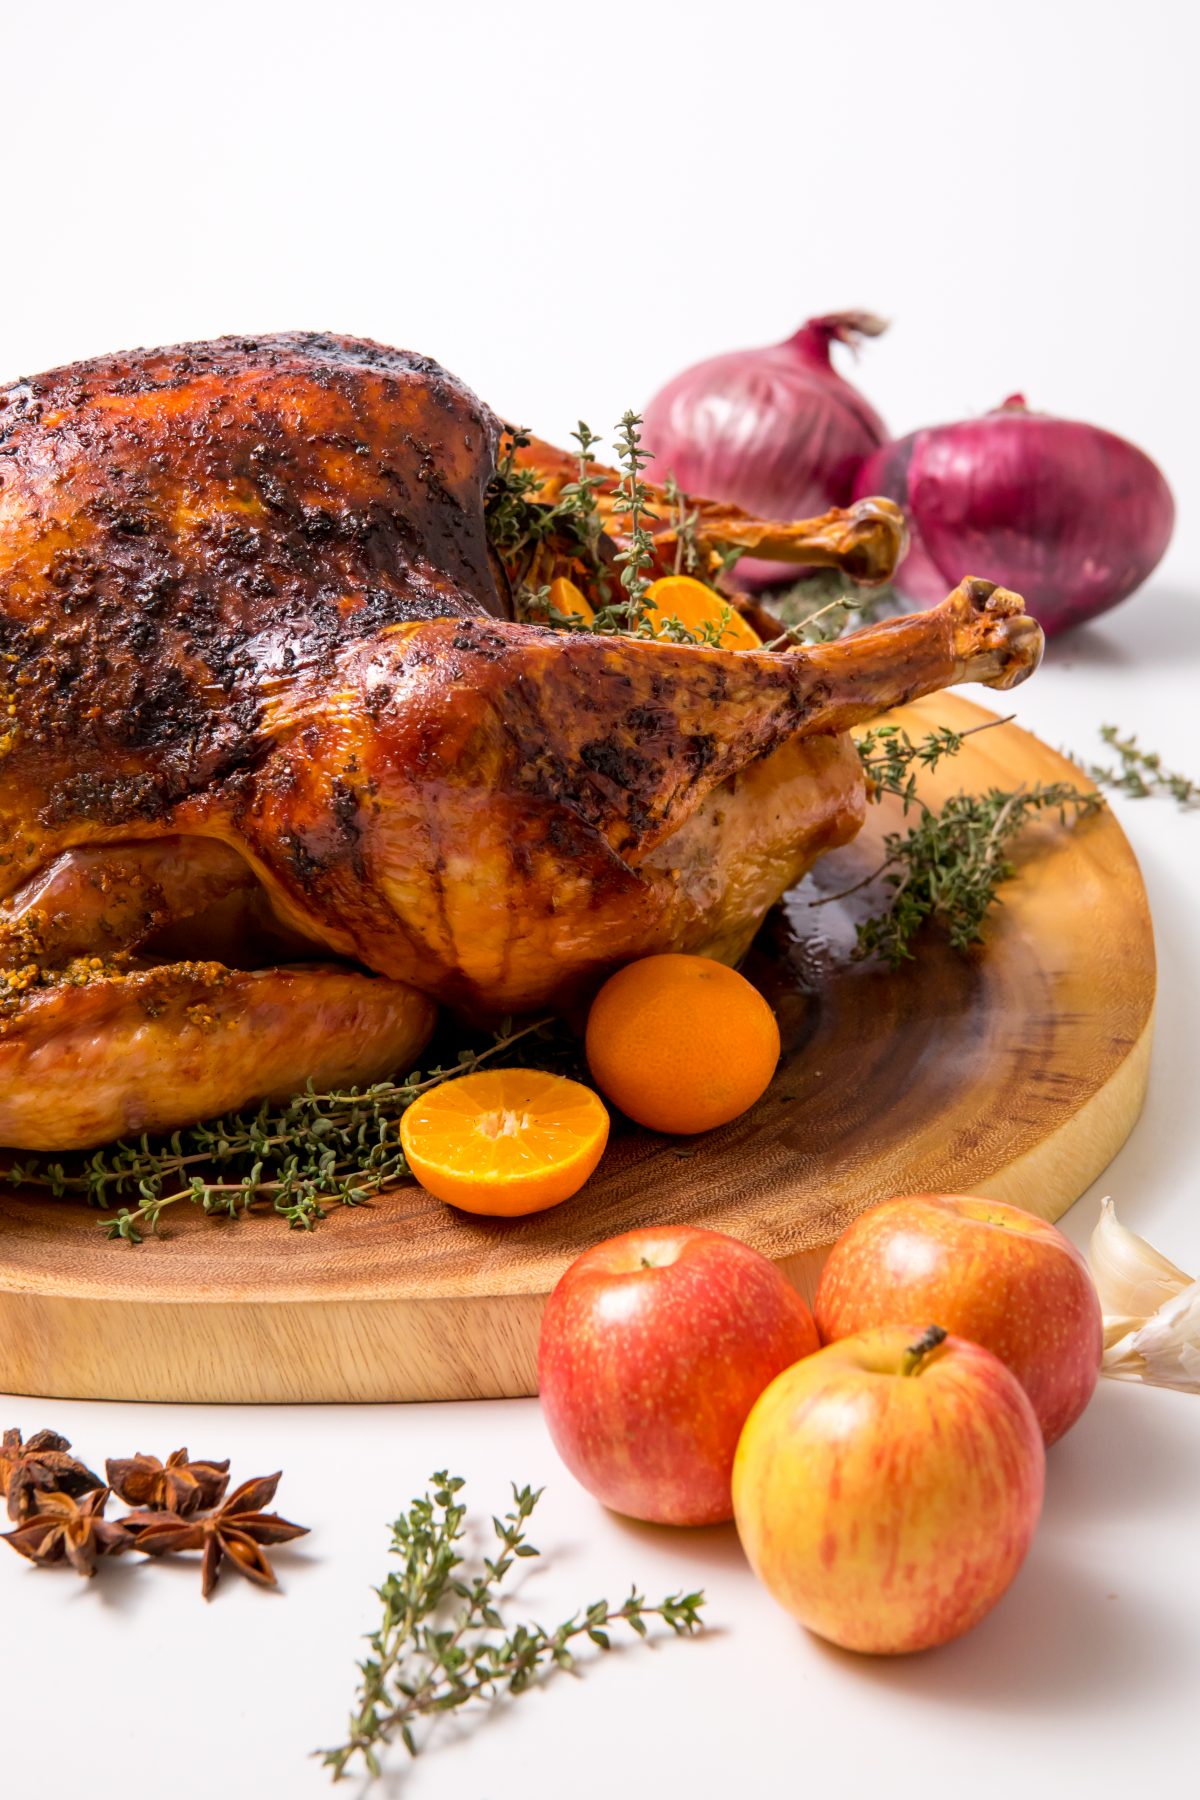 5D4B7678 - Orange Anise and Thyme Turkey. Roasted to perfection!